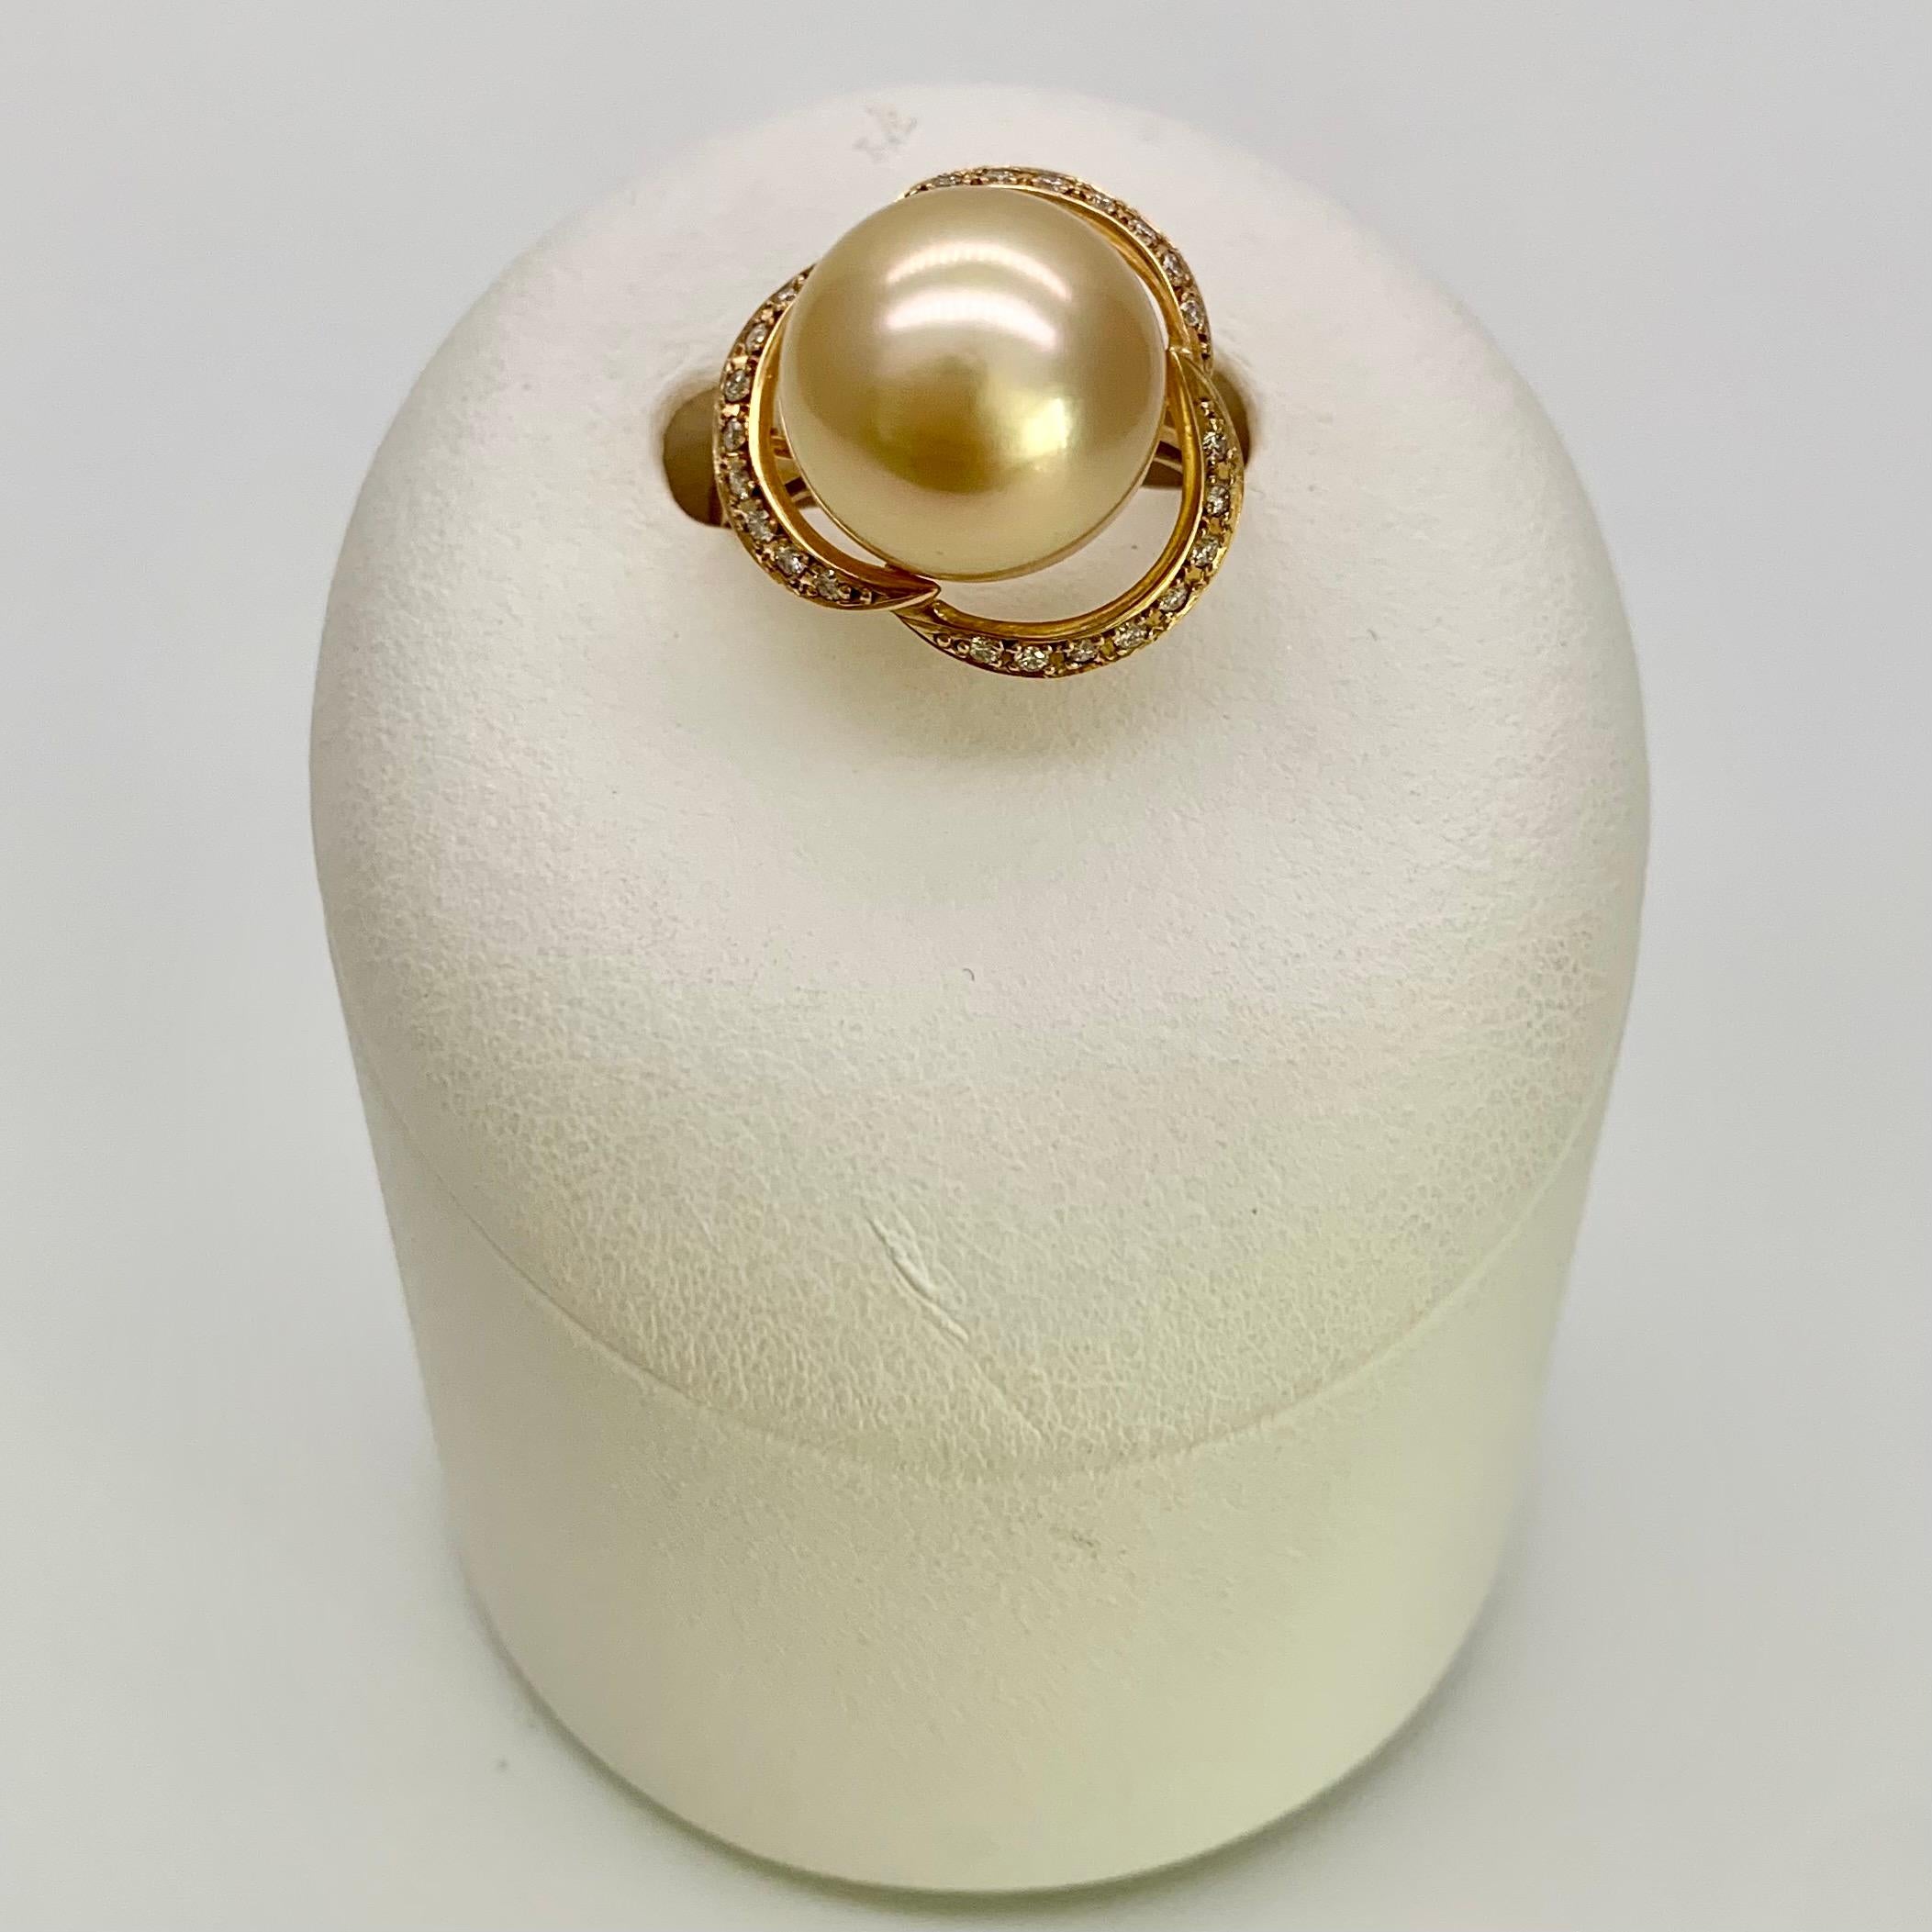 A Single 12.1mm Gold South Sea Pearl set in 18K Gold Diamond Rings with beautiful luster and color, like a flower. Perfect for special occasions.

South Sea Pearls are cultivated in the warm South Pacific which allows them to grow to be among the